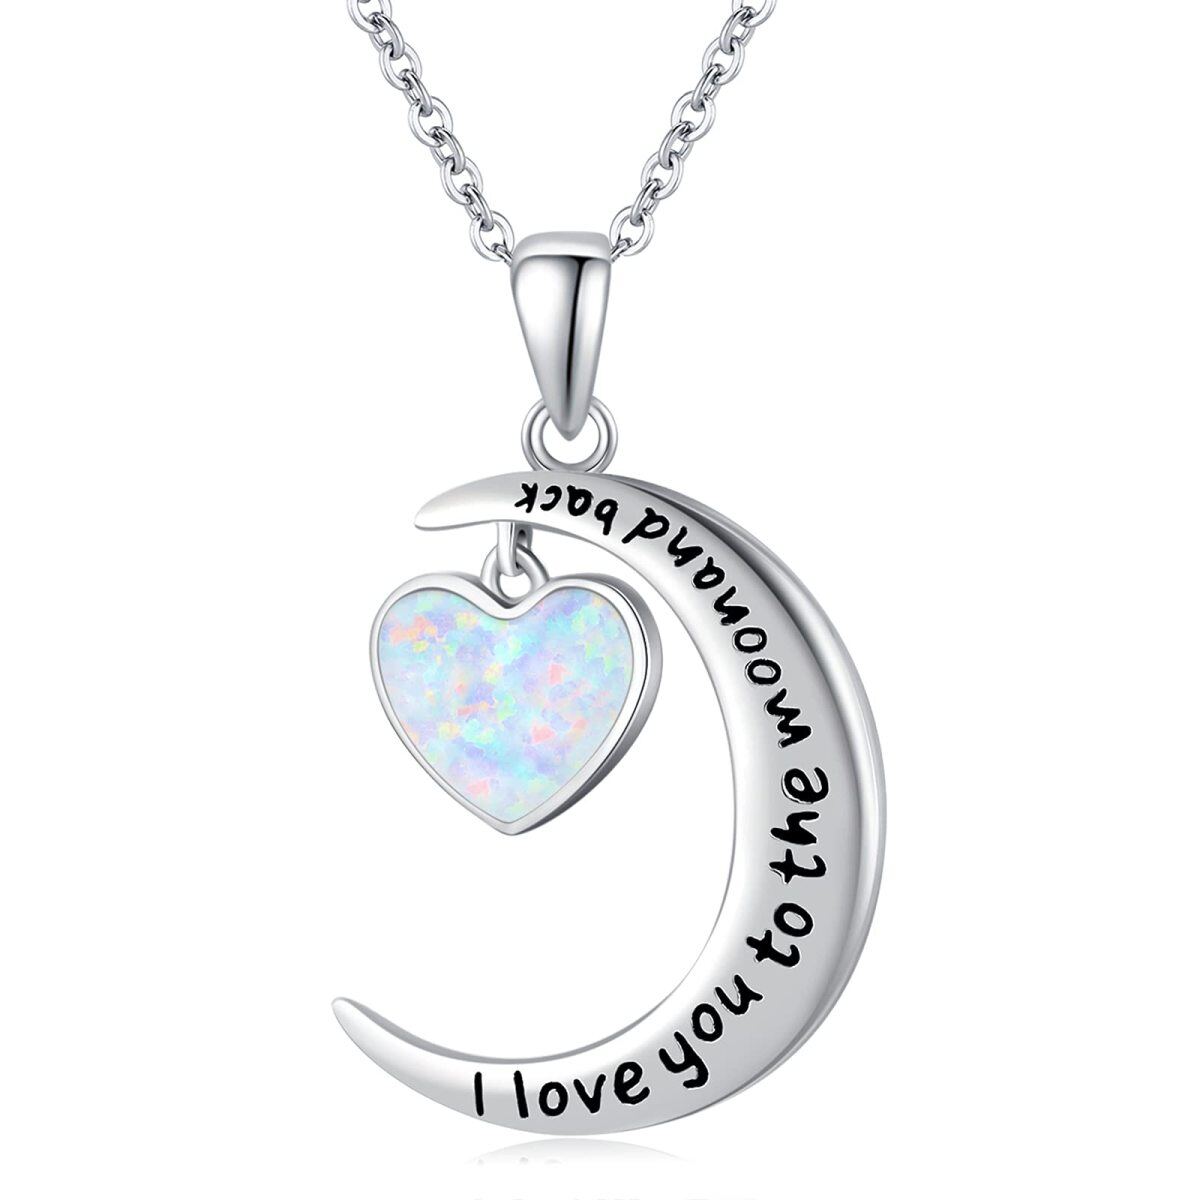 Sterling Silver Heart Shaped Opal Moon Pendant Necklace with Engraved Word-1